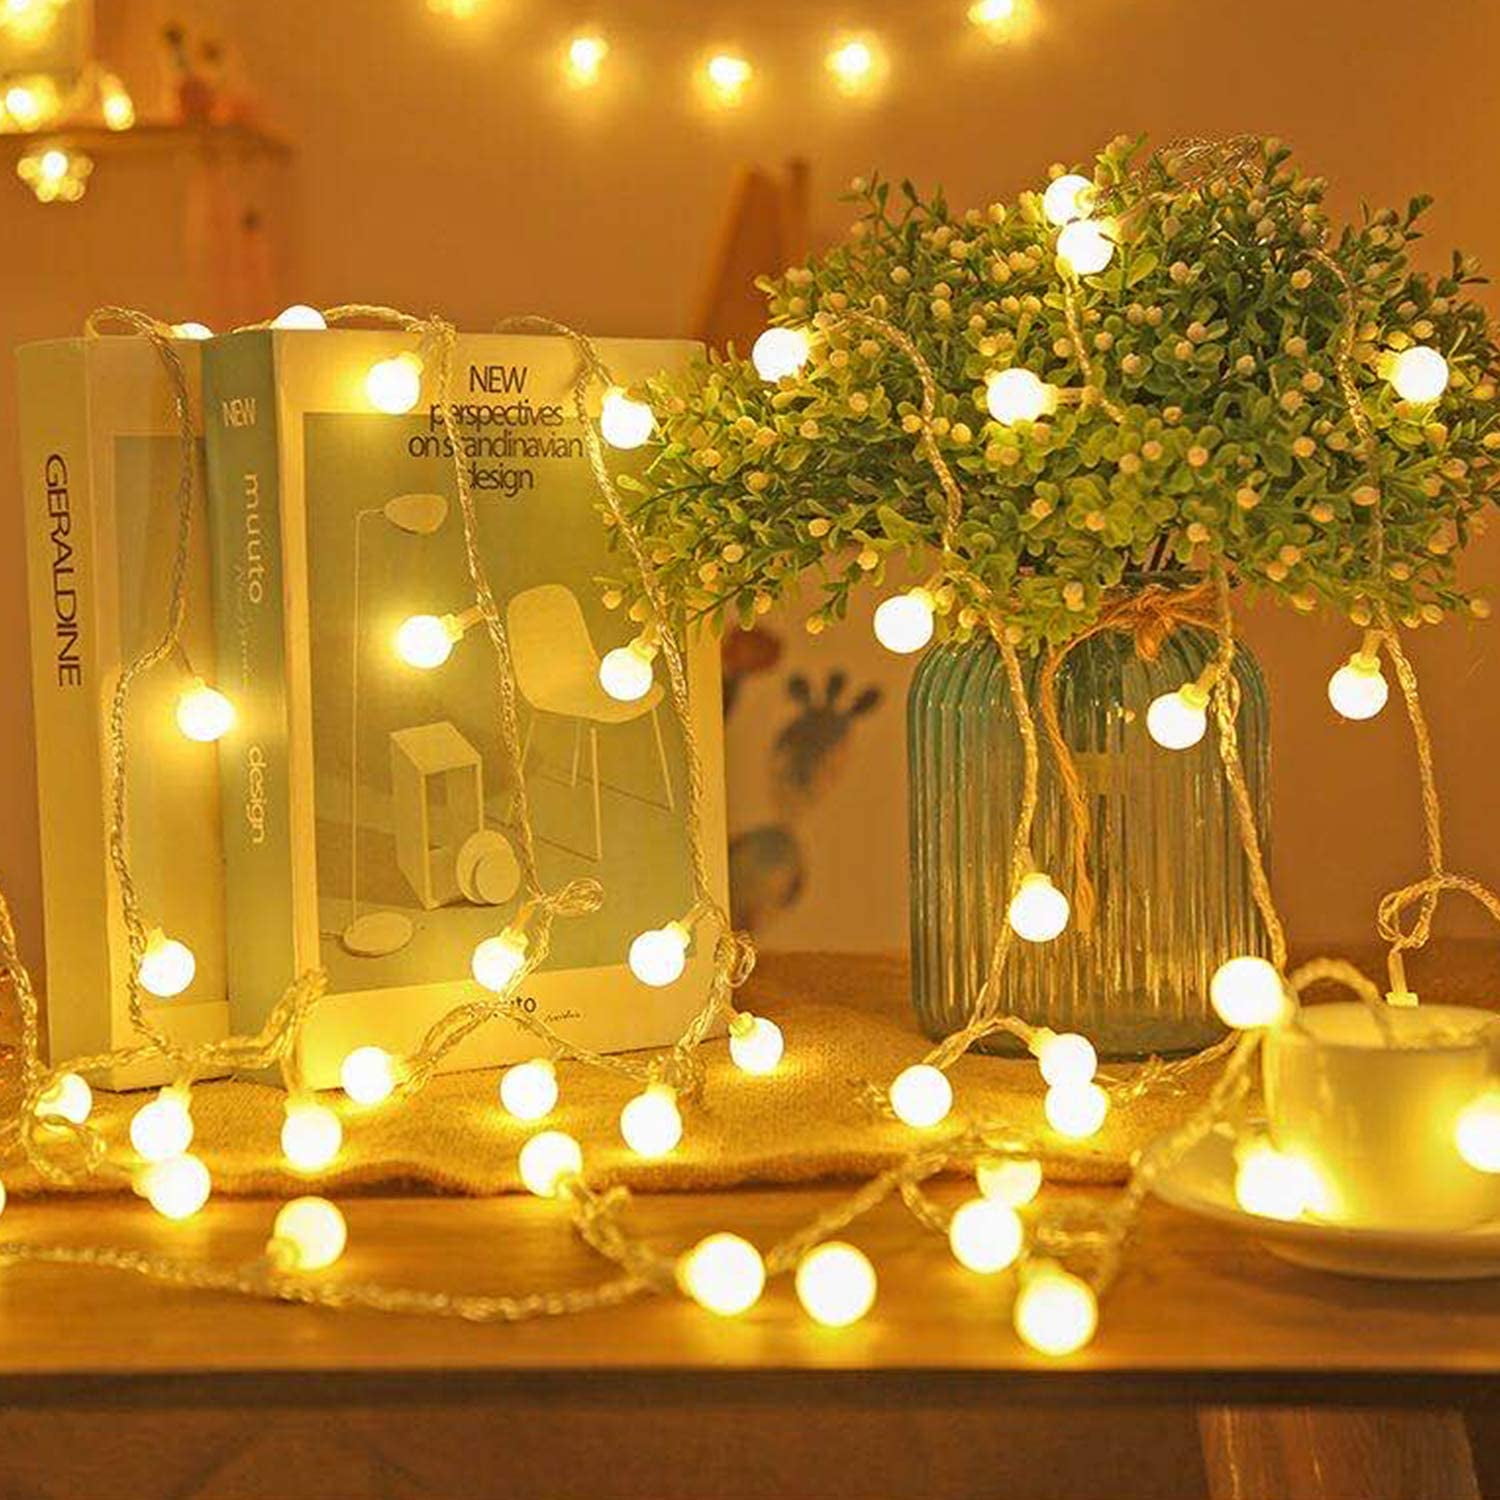 10M 100LEDs Christmas String Lights Wedding Xmas Party Decor Outdoor Indoor Lamp 